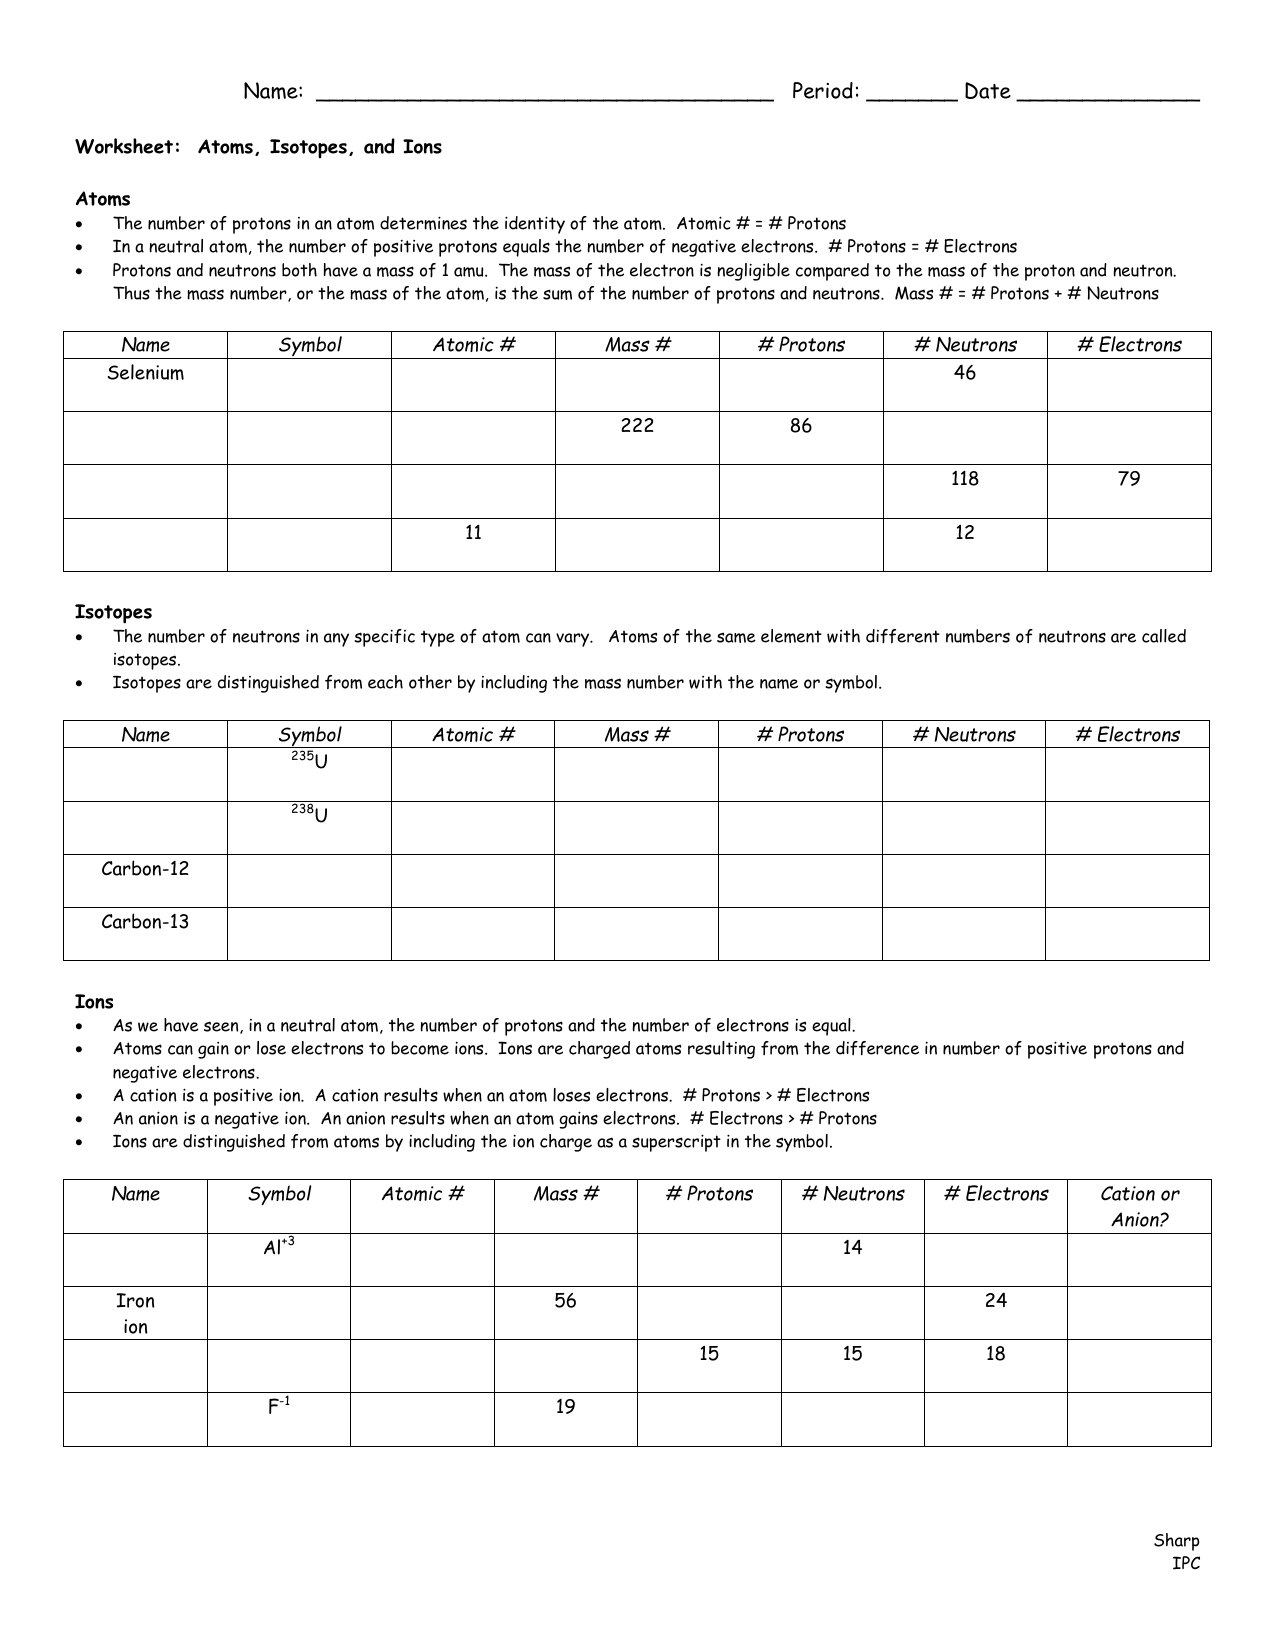 Atoms, Isotopes, & Ions Worksheet Throughout Atoms And Ions Worksheet Answers